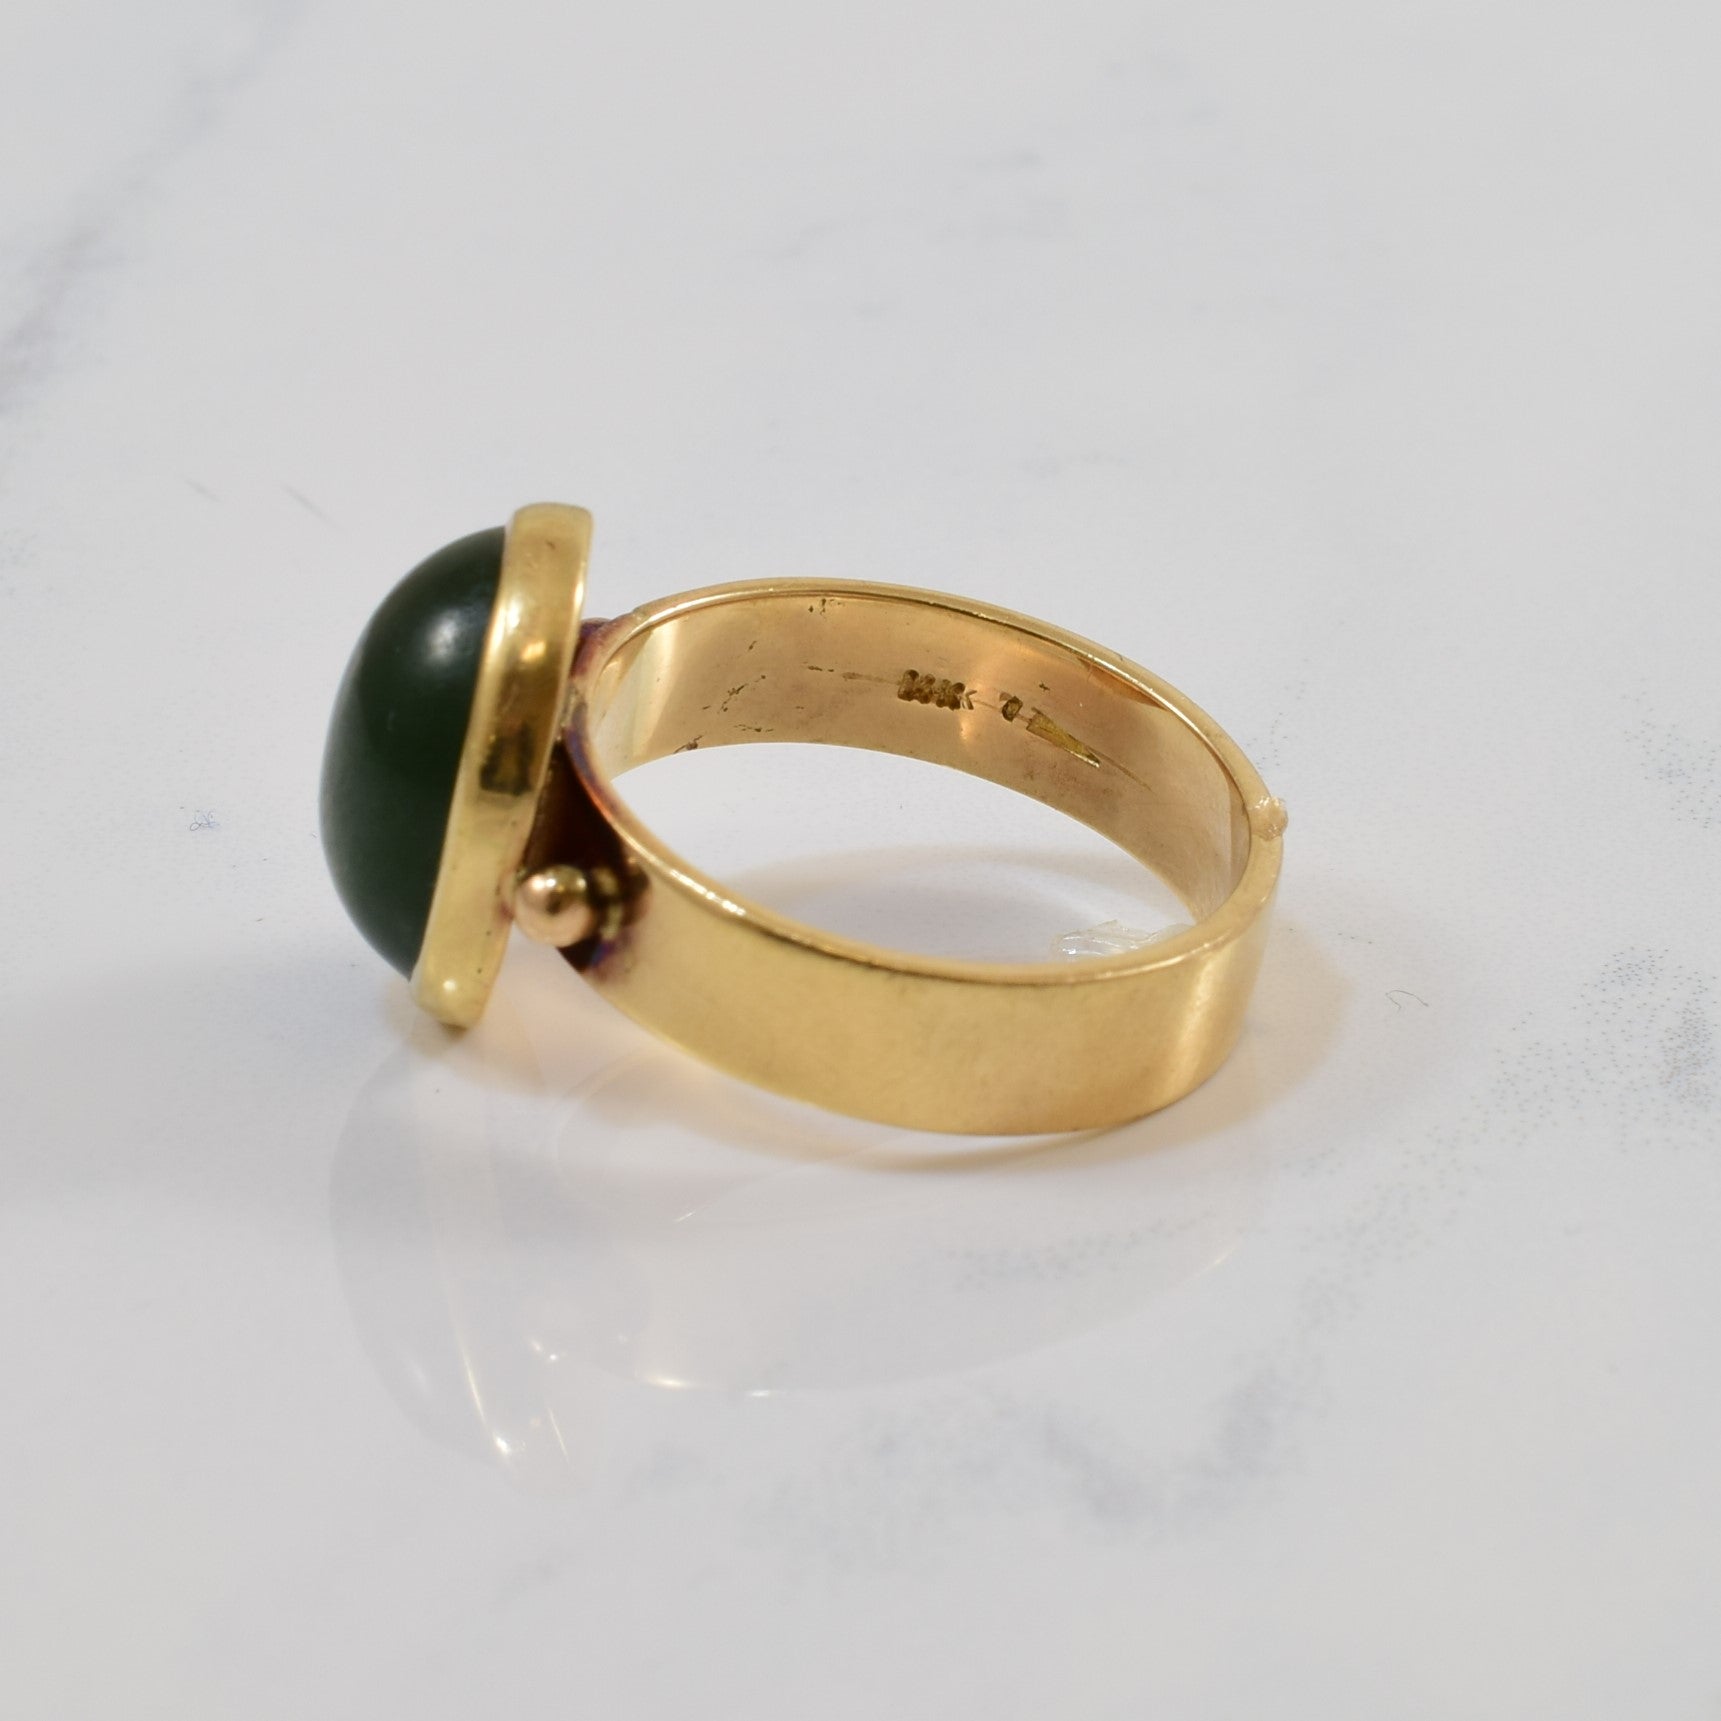 Oval Nephrite Cabochon Ring | 4.75ct | SZ 8.75 |